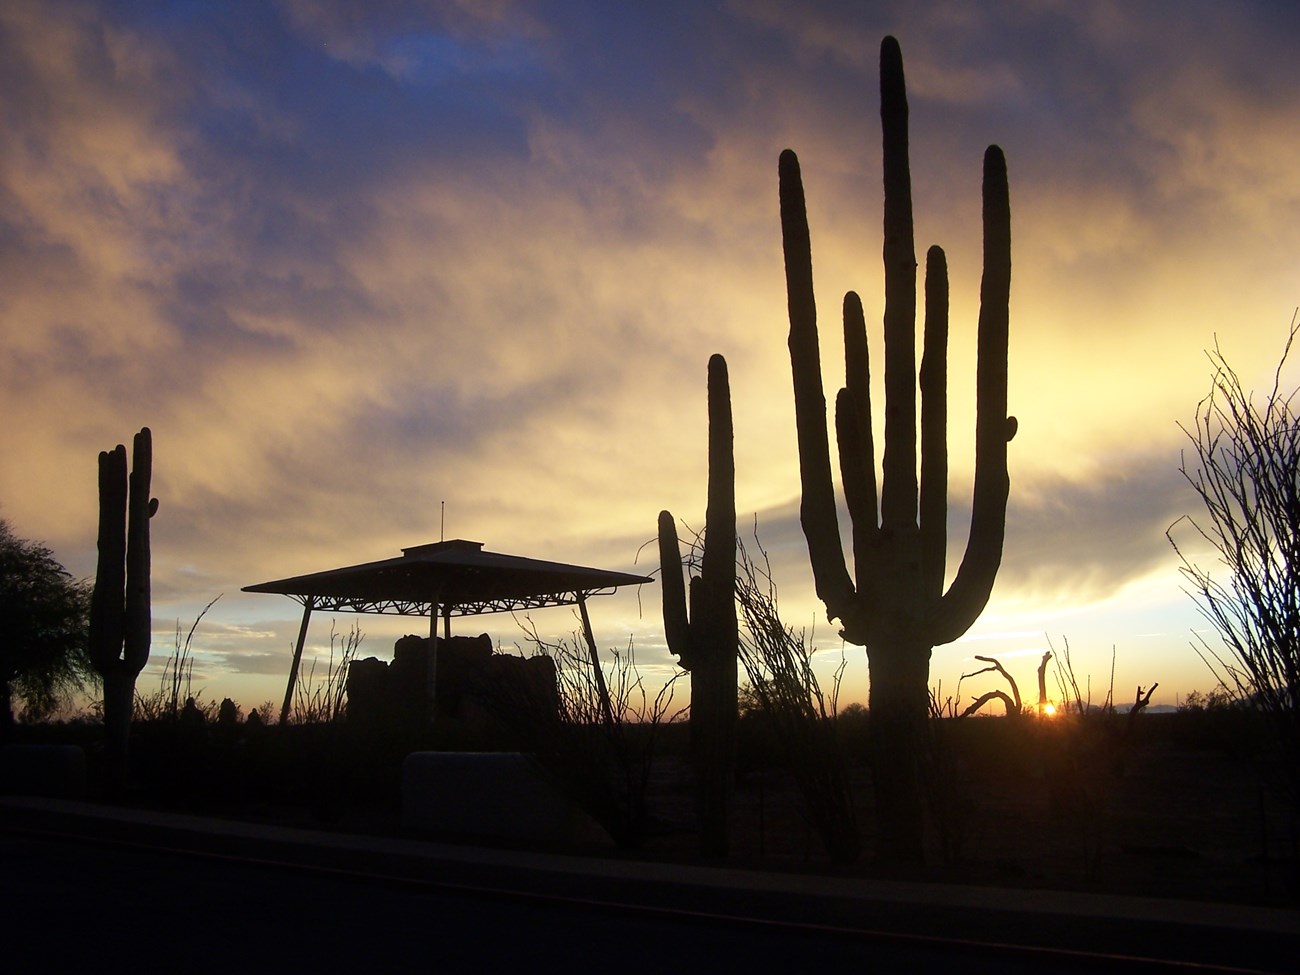 sunset at Casa Grande Ruins with saguaro cactus silhouettes framing a silhouette of the Great House